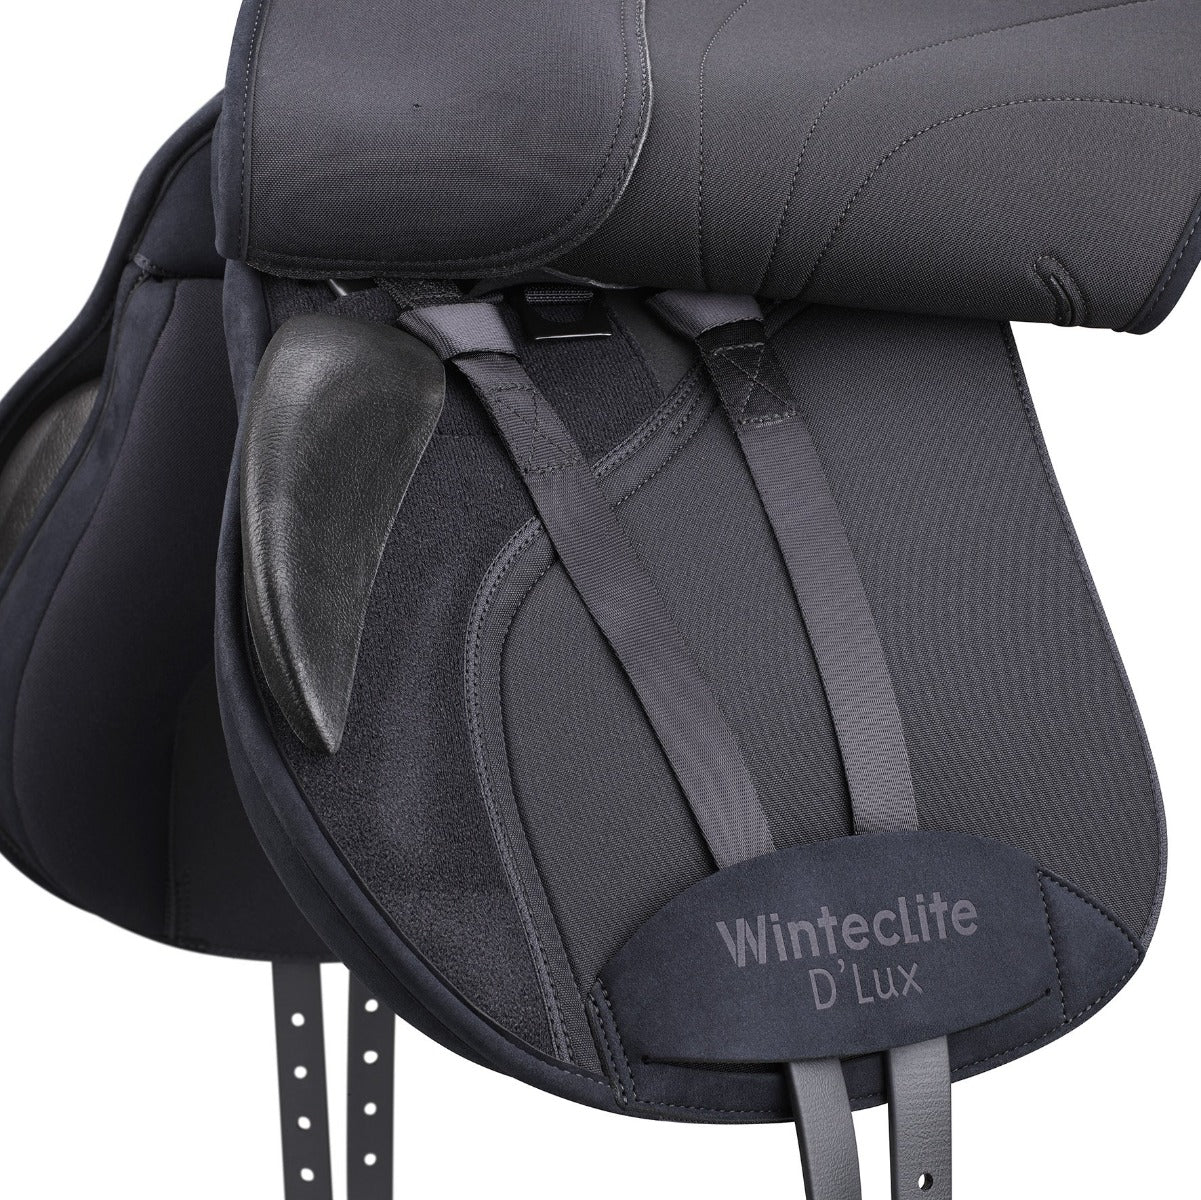 WintecLite All Purpose D'Lux Saddle with HART